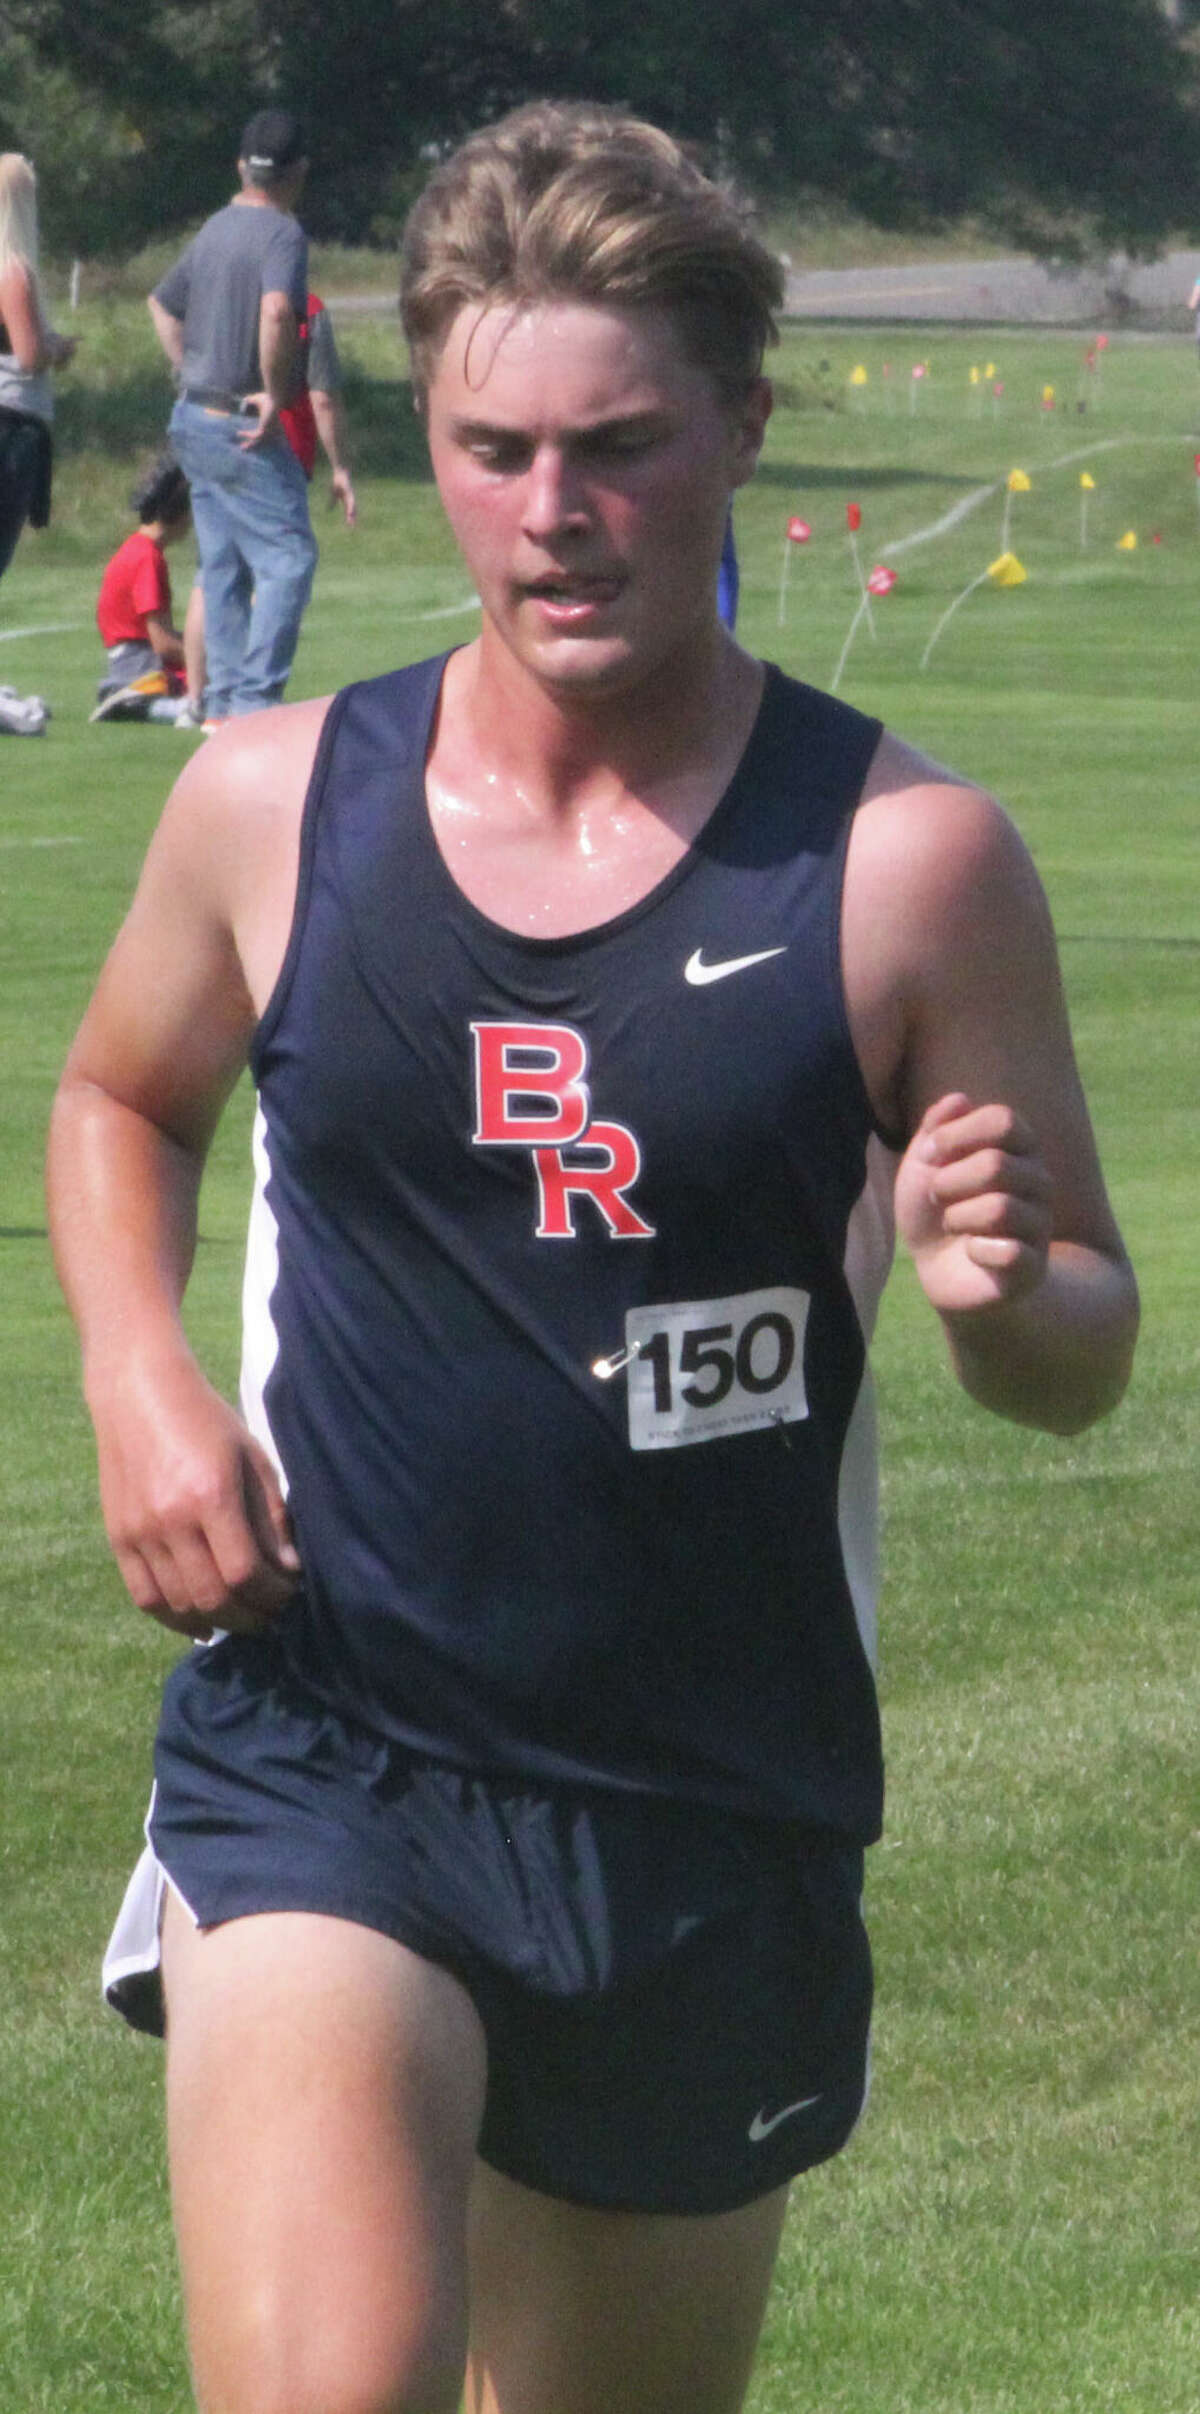 Ben Knuth ran cross country for Big Rapids and plans on doing it at Ferris State.